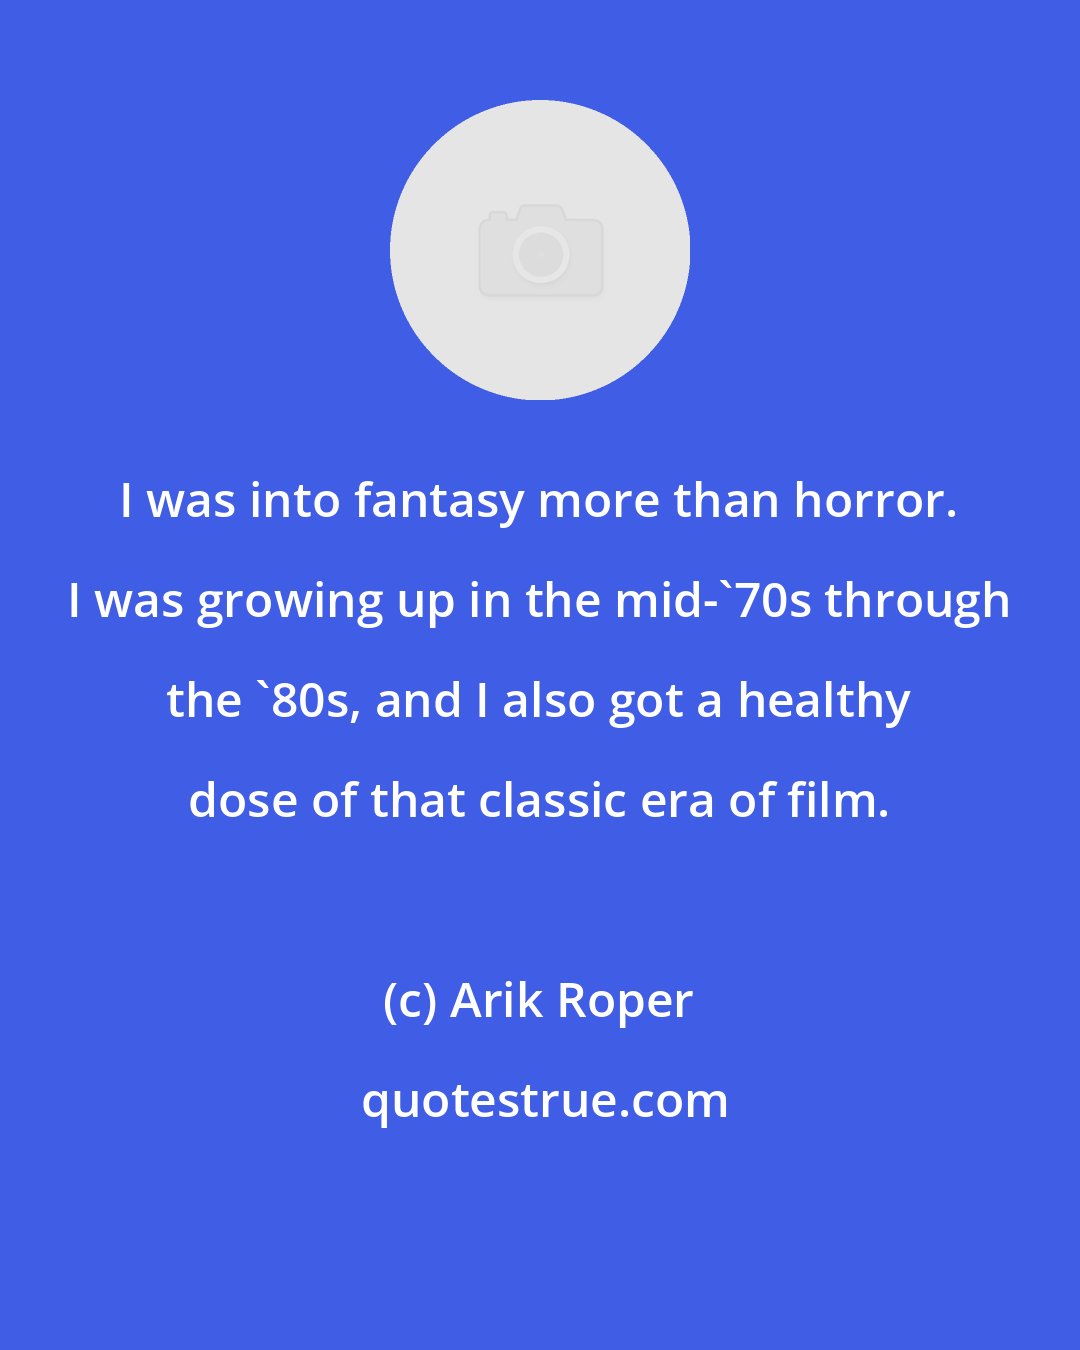 Arik Roper: I was into fantasy more than horror. I was growing up in the mid-'70s through the '80s, and I also got a healthy dose of that classic era of film.